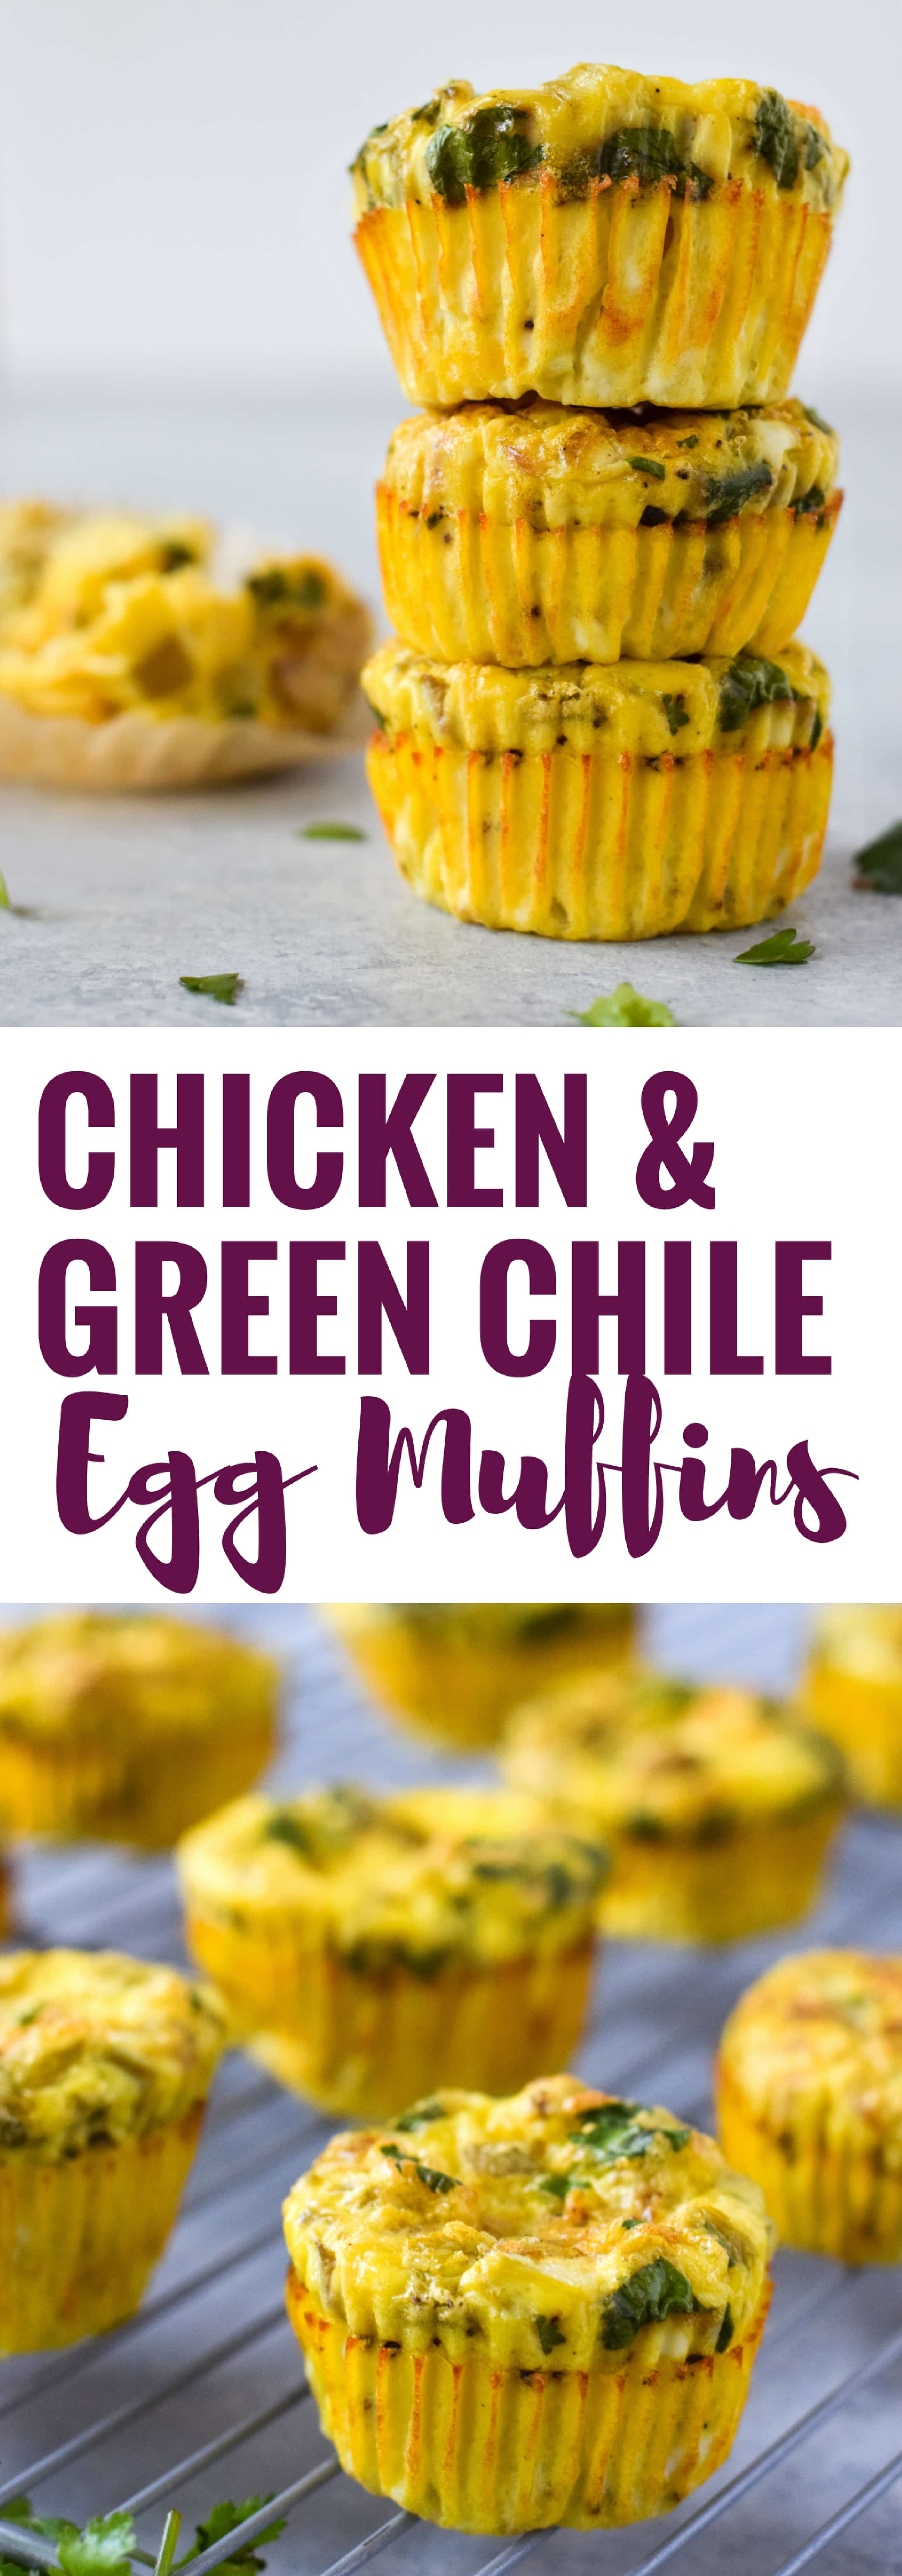 Easy, healthy and filling Chicken and Green Chile Egg Muffins - ready in only 30 minutes, this on-the-go breakfast is gluten free, low carb and paleo friendly.